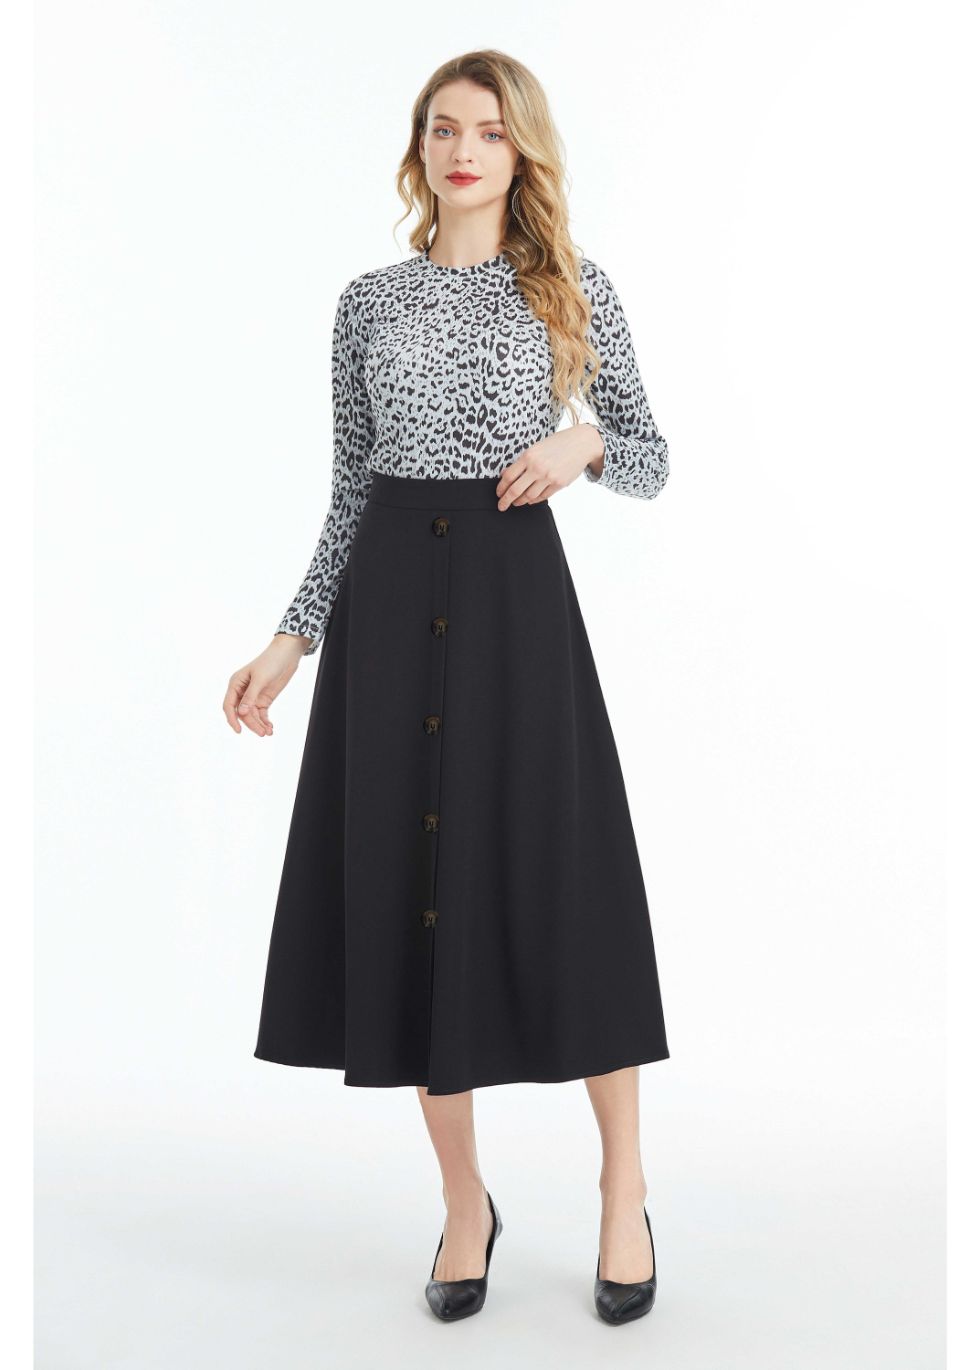 Fully Lined Black Midi Skirt with Front Button Detail - figaliciousfood